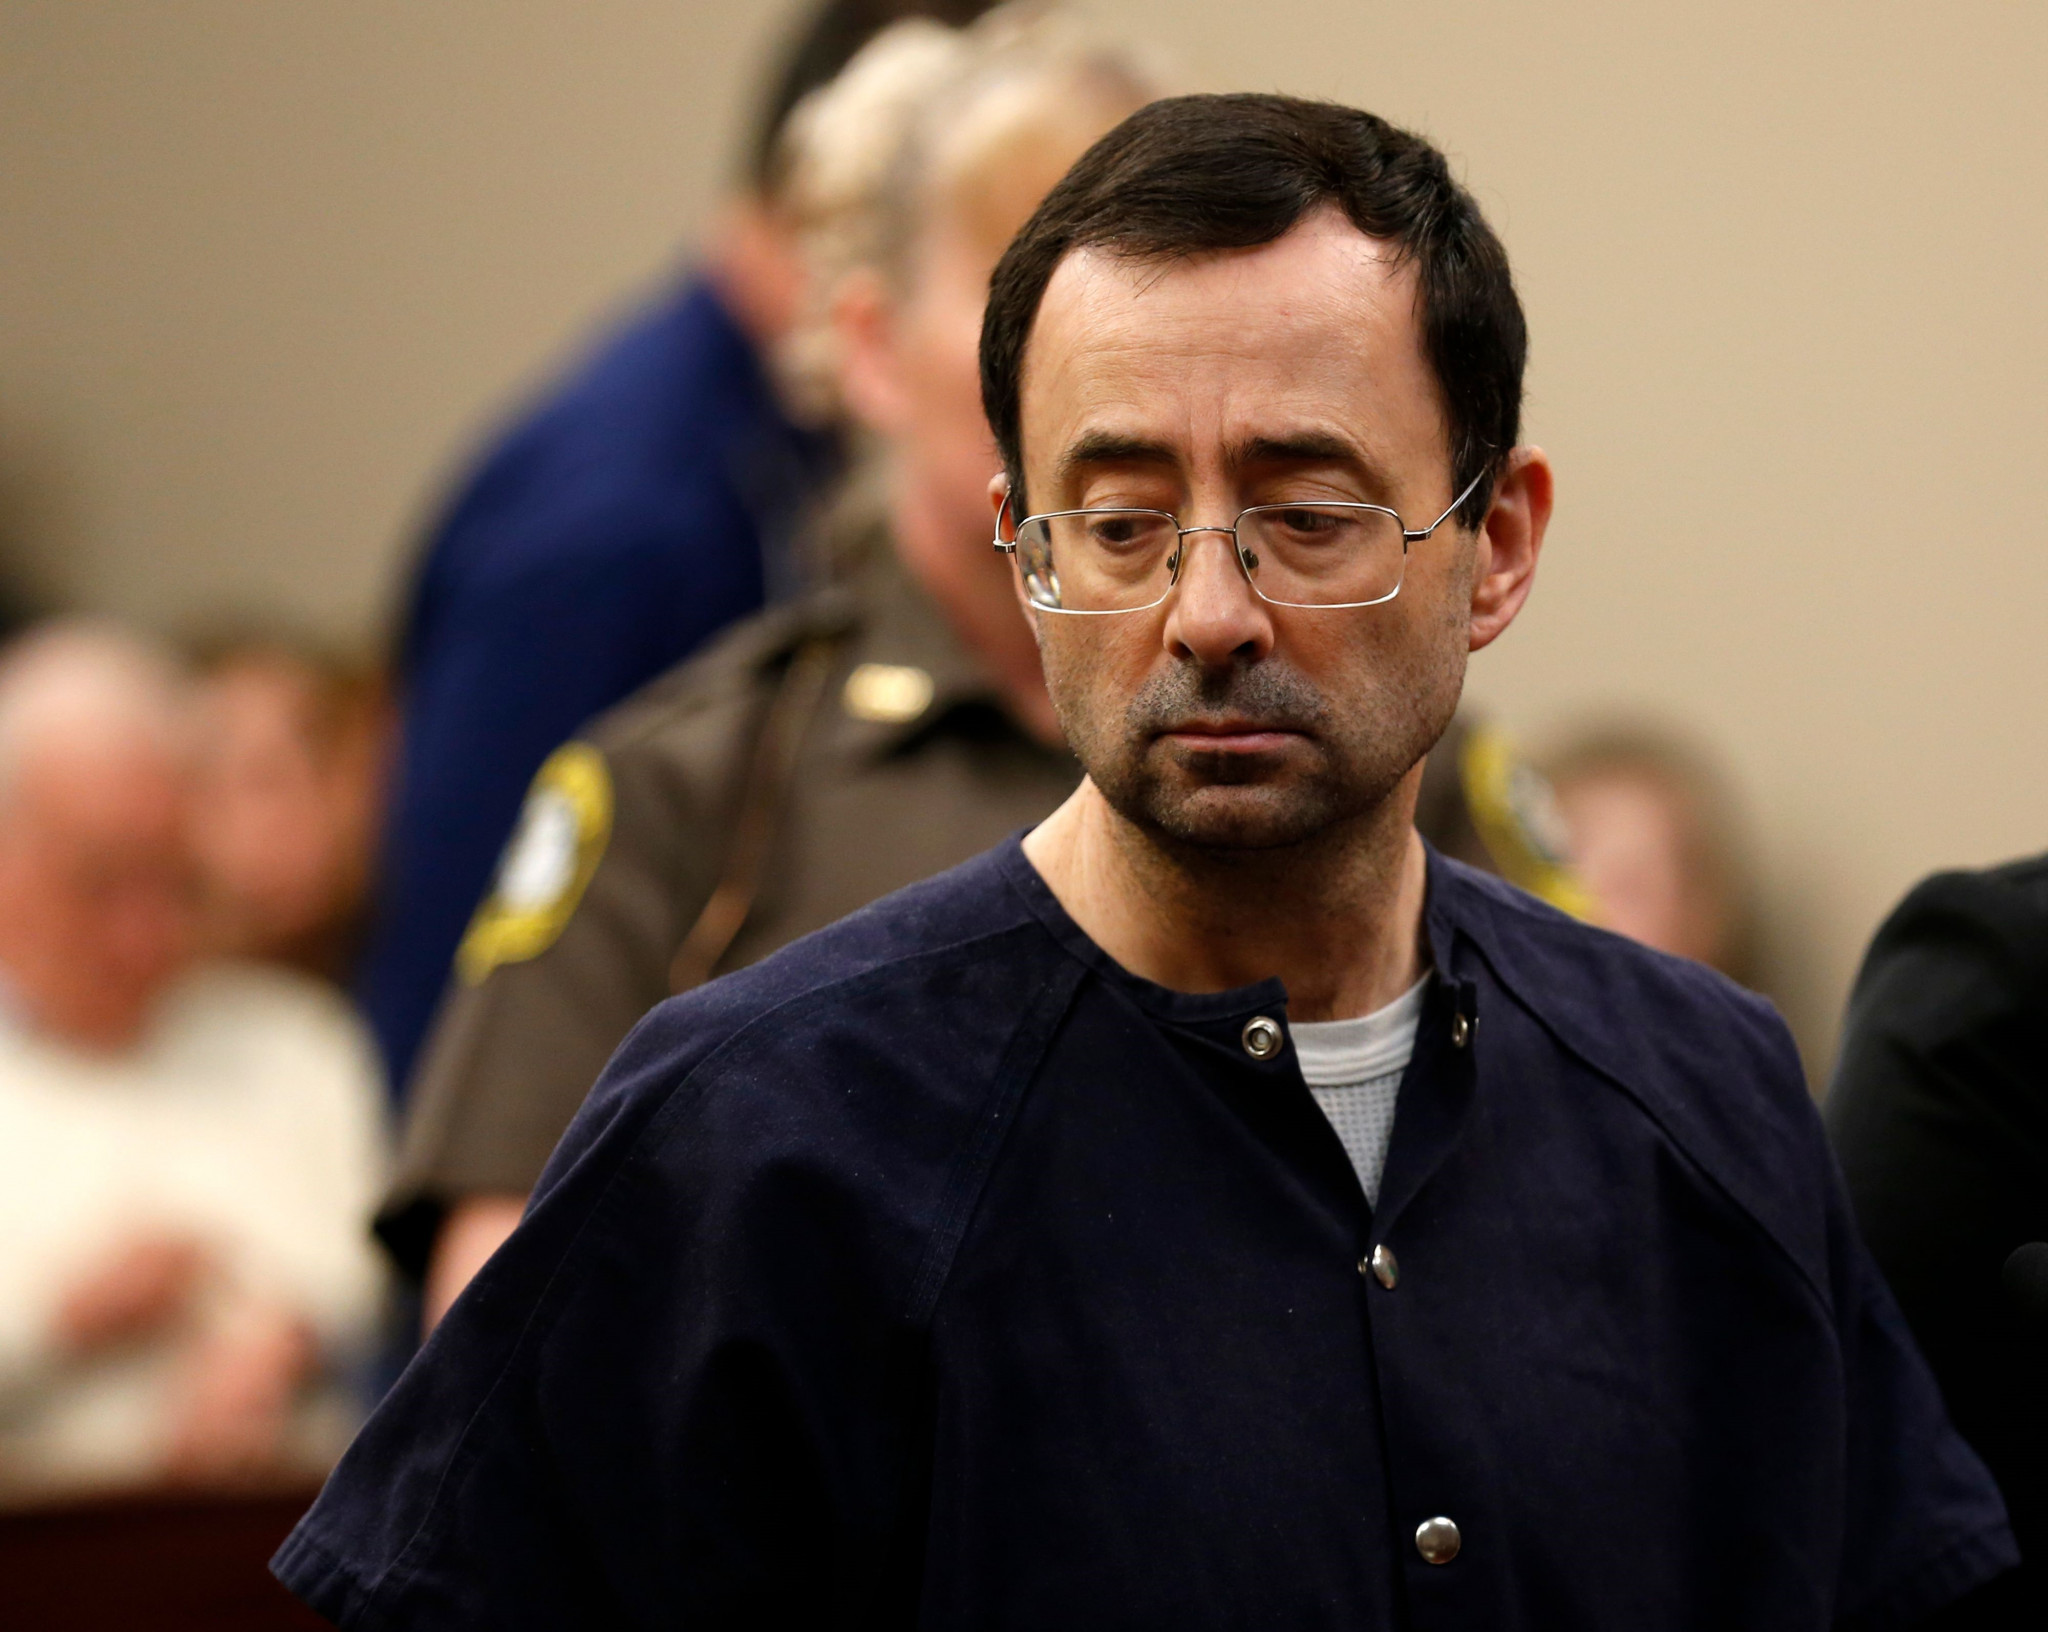 Larry Nassar was sentenced to 175 years in prison for possession of child pornography and pleading guilty on 10 sexual assault charges ©Getty Images